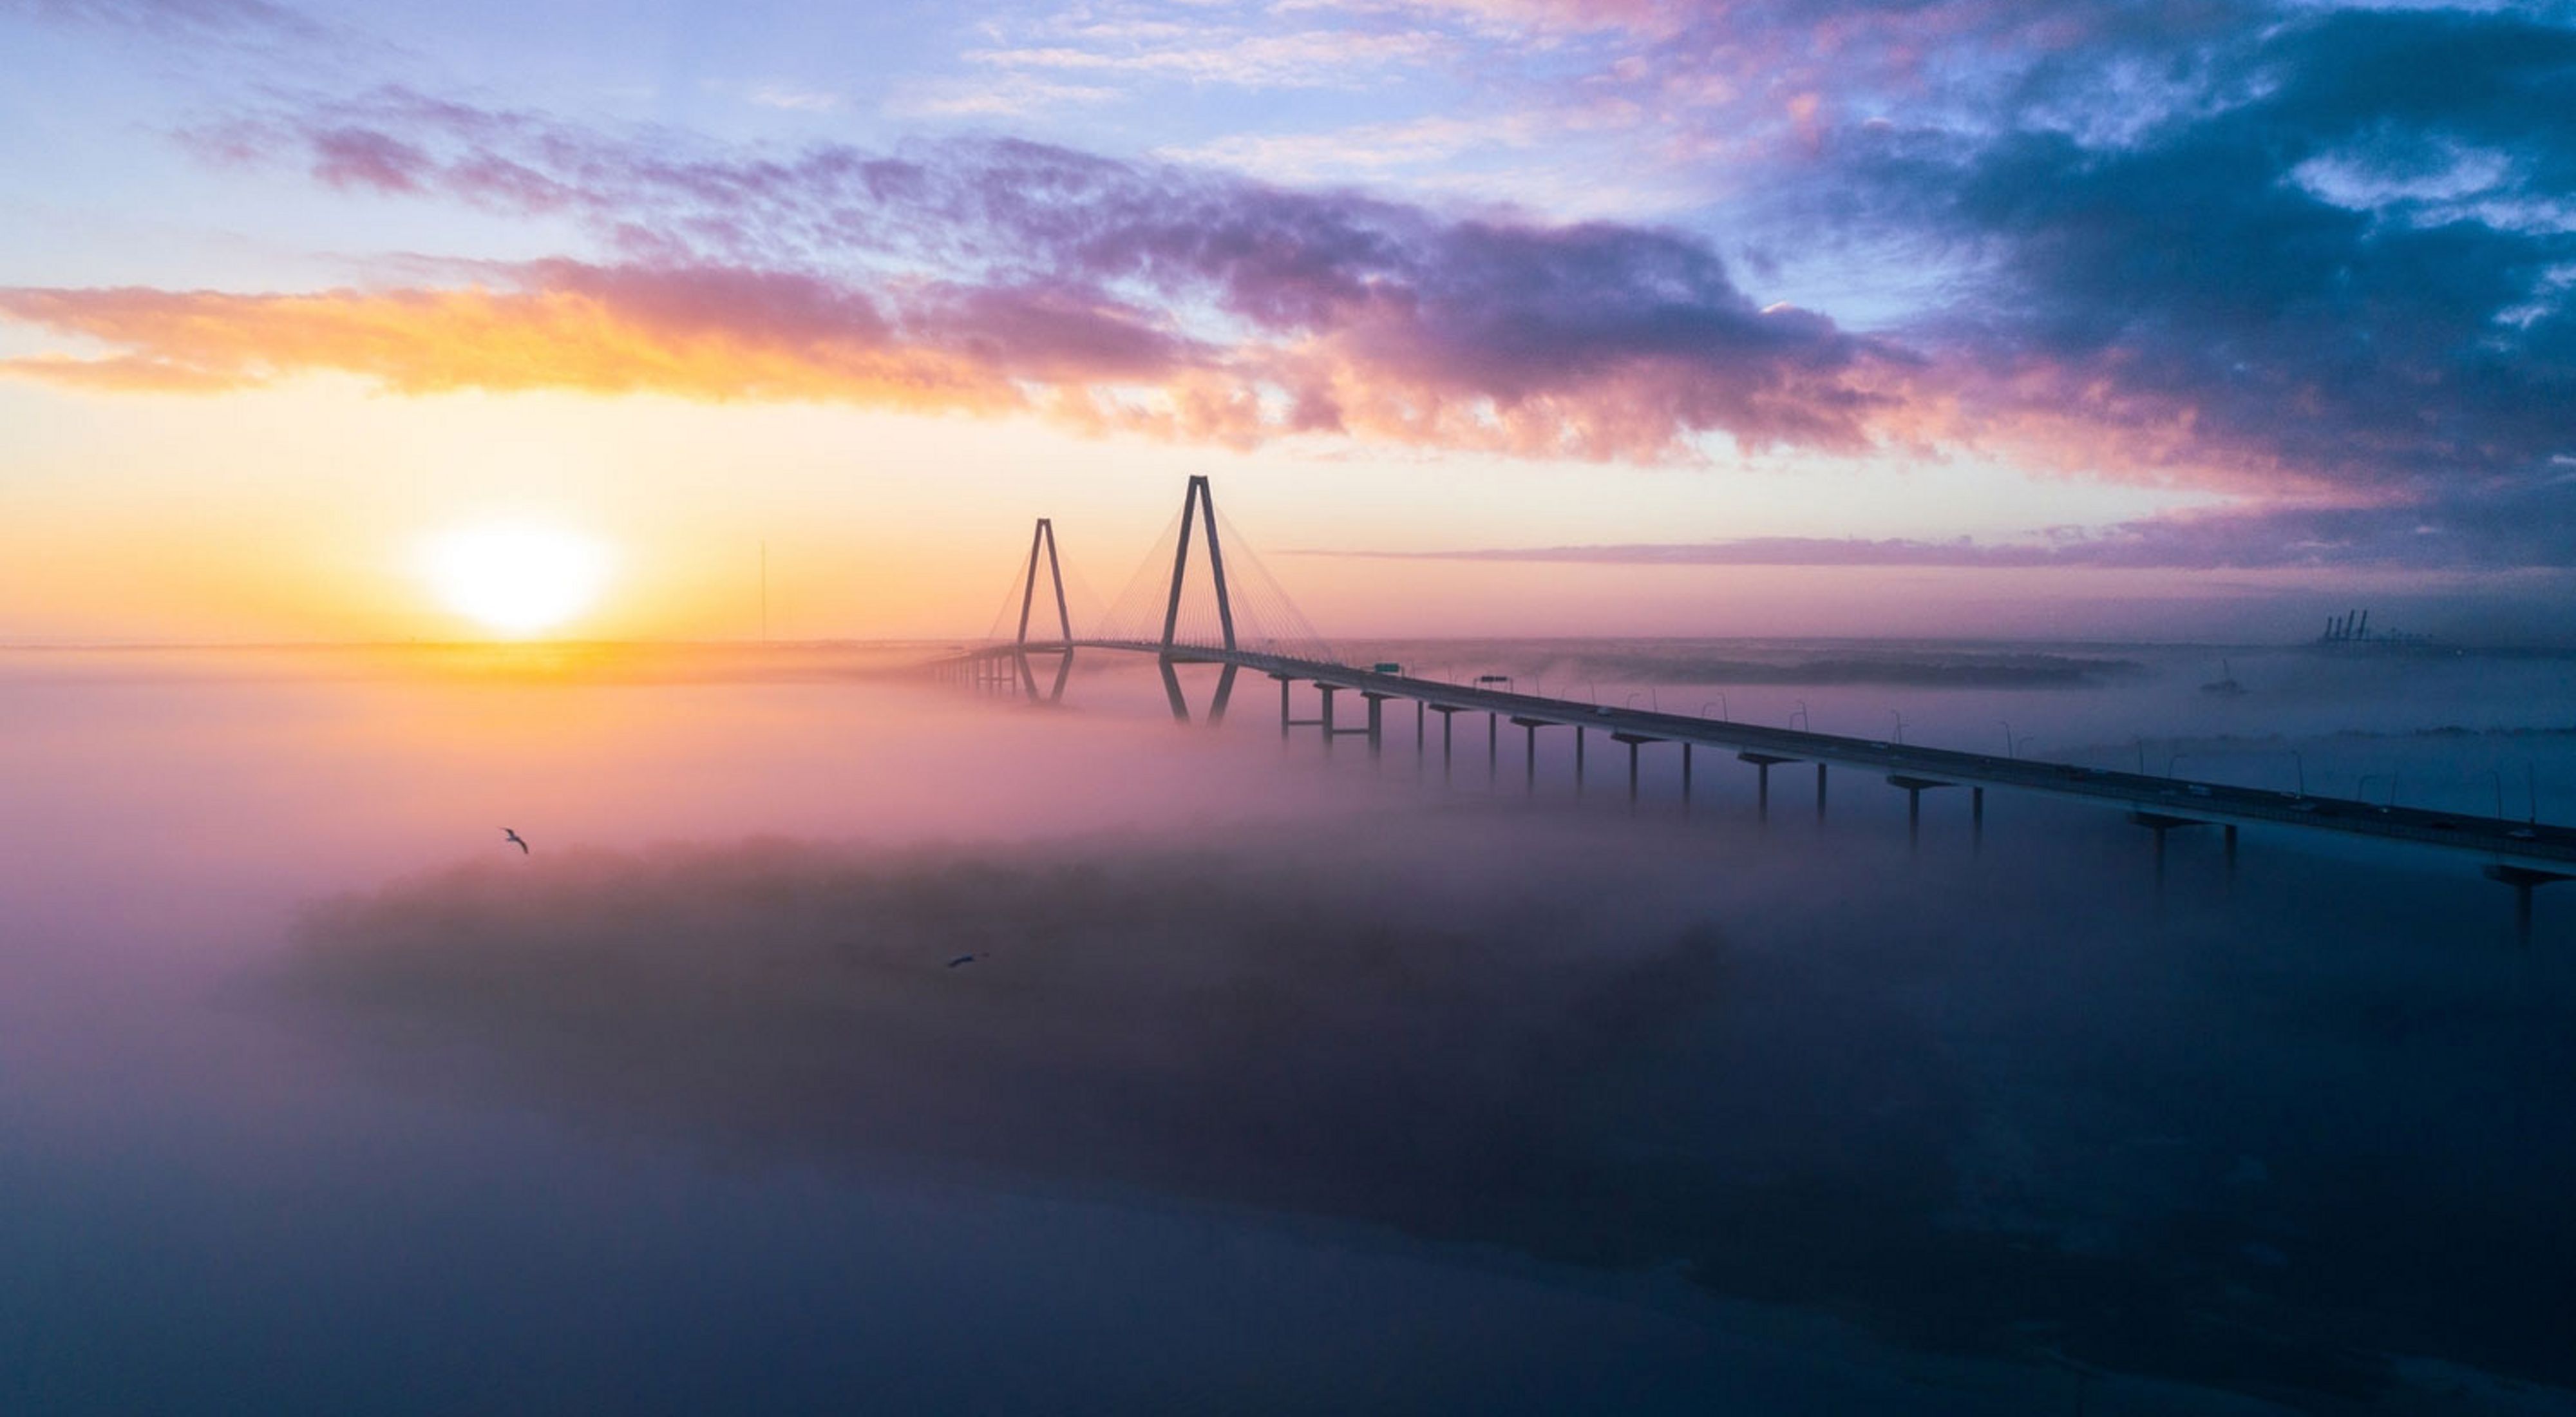 Sea fog covered the water below the Ravenel bridge during a chilly sunrise in Charleston, SC in February 2018.